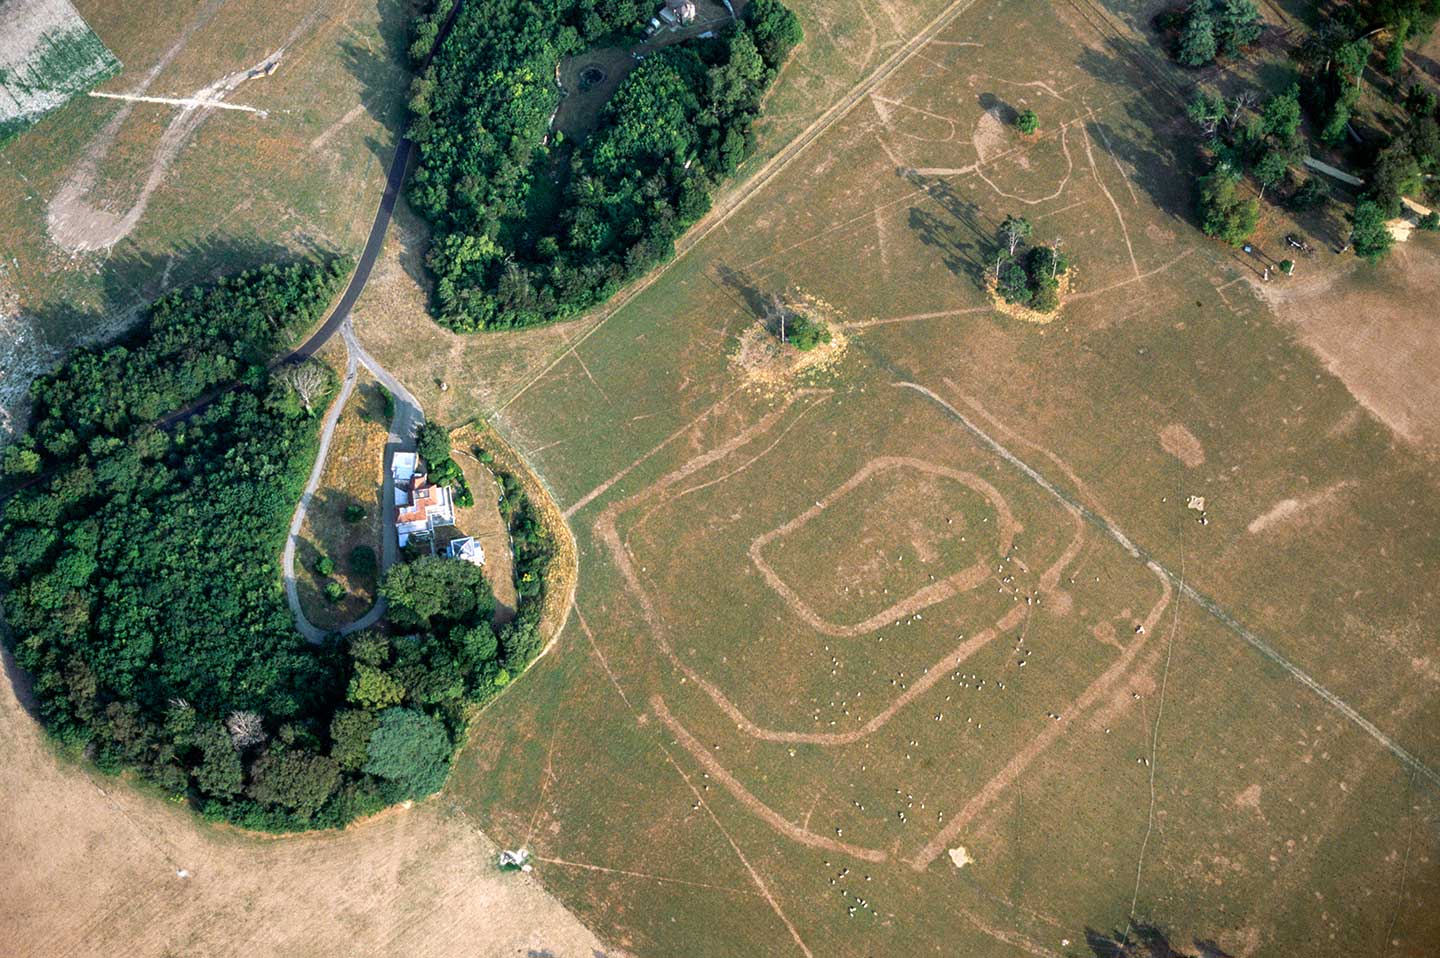 Colour aerial photo showing grass fields with the archaeology seen as pale lines against a generally darker background